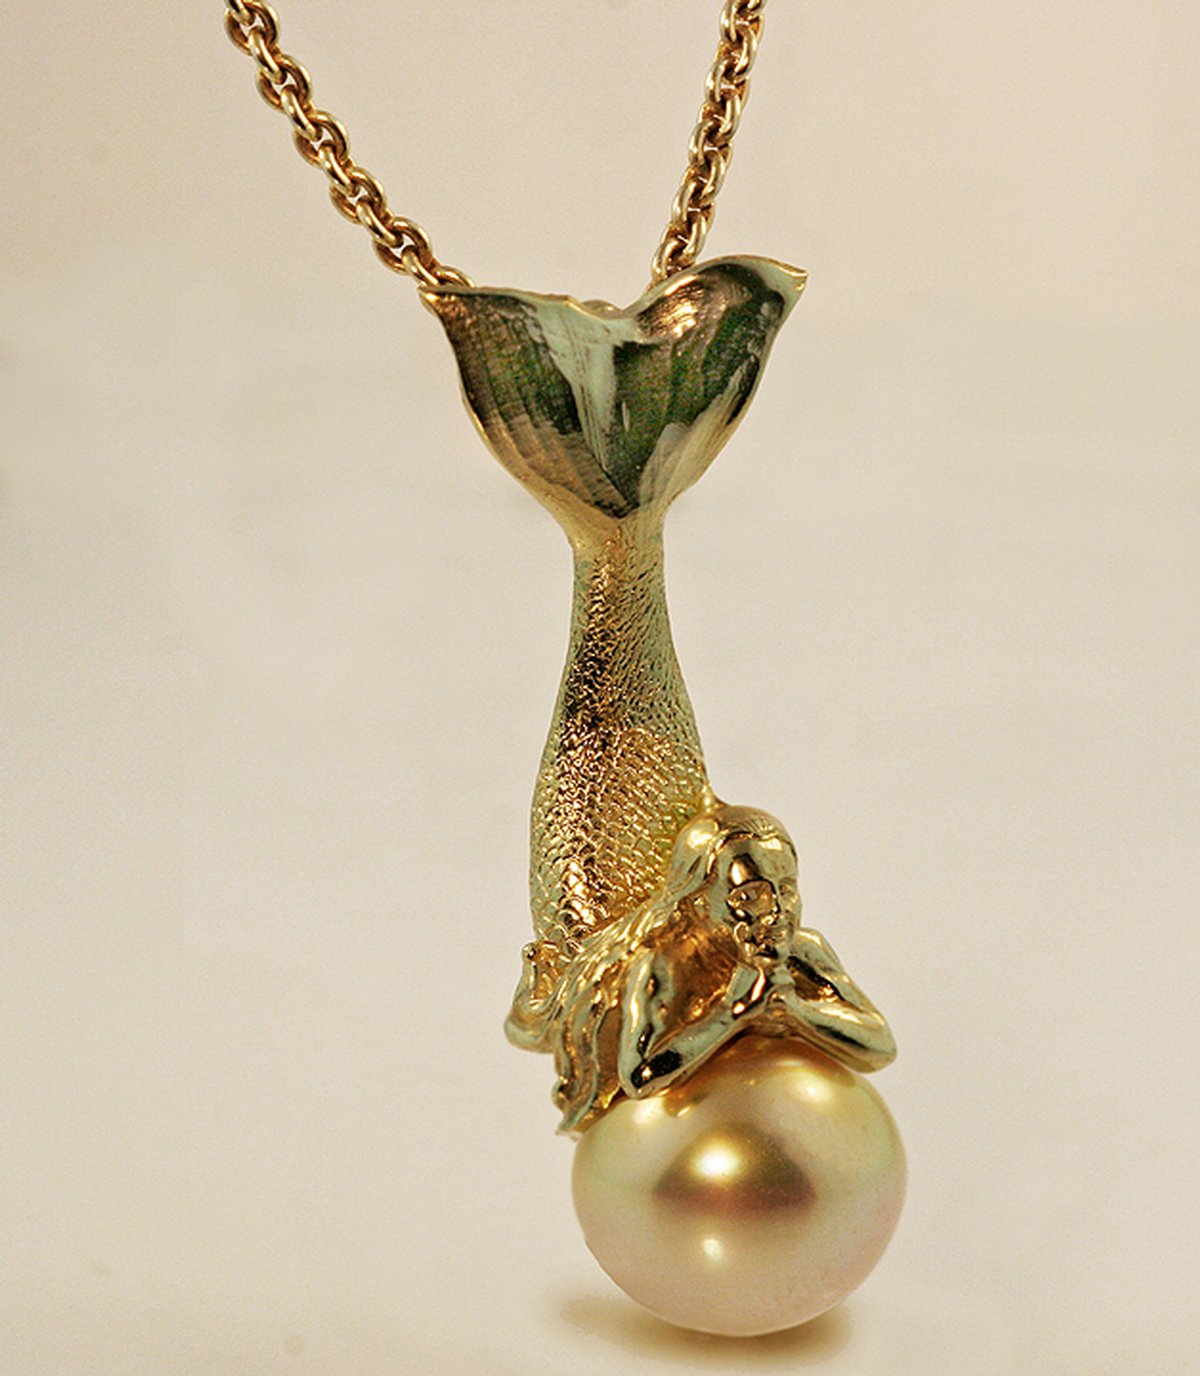 Mermaid Resting on a Pearl, 14K Gold